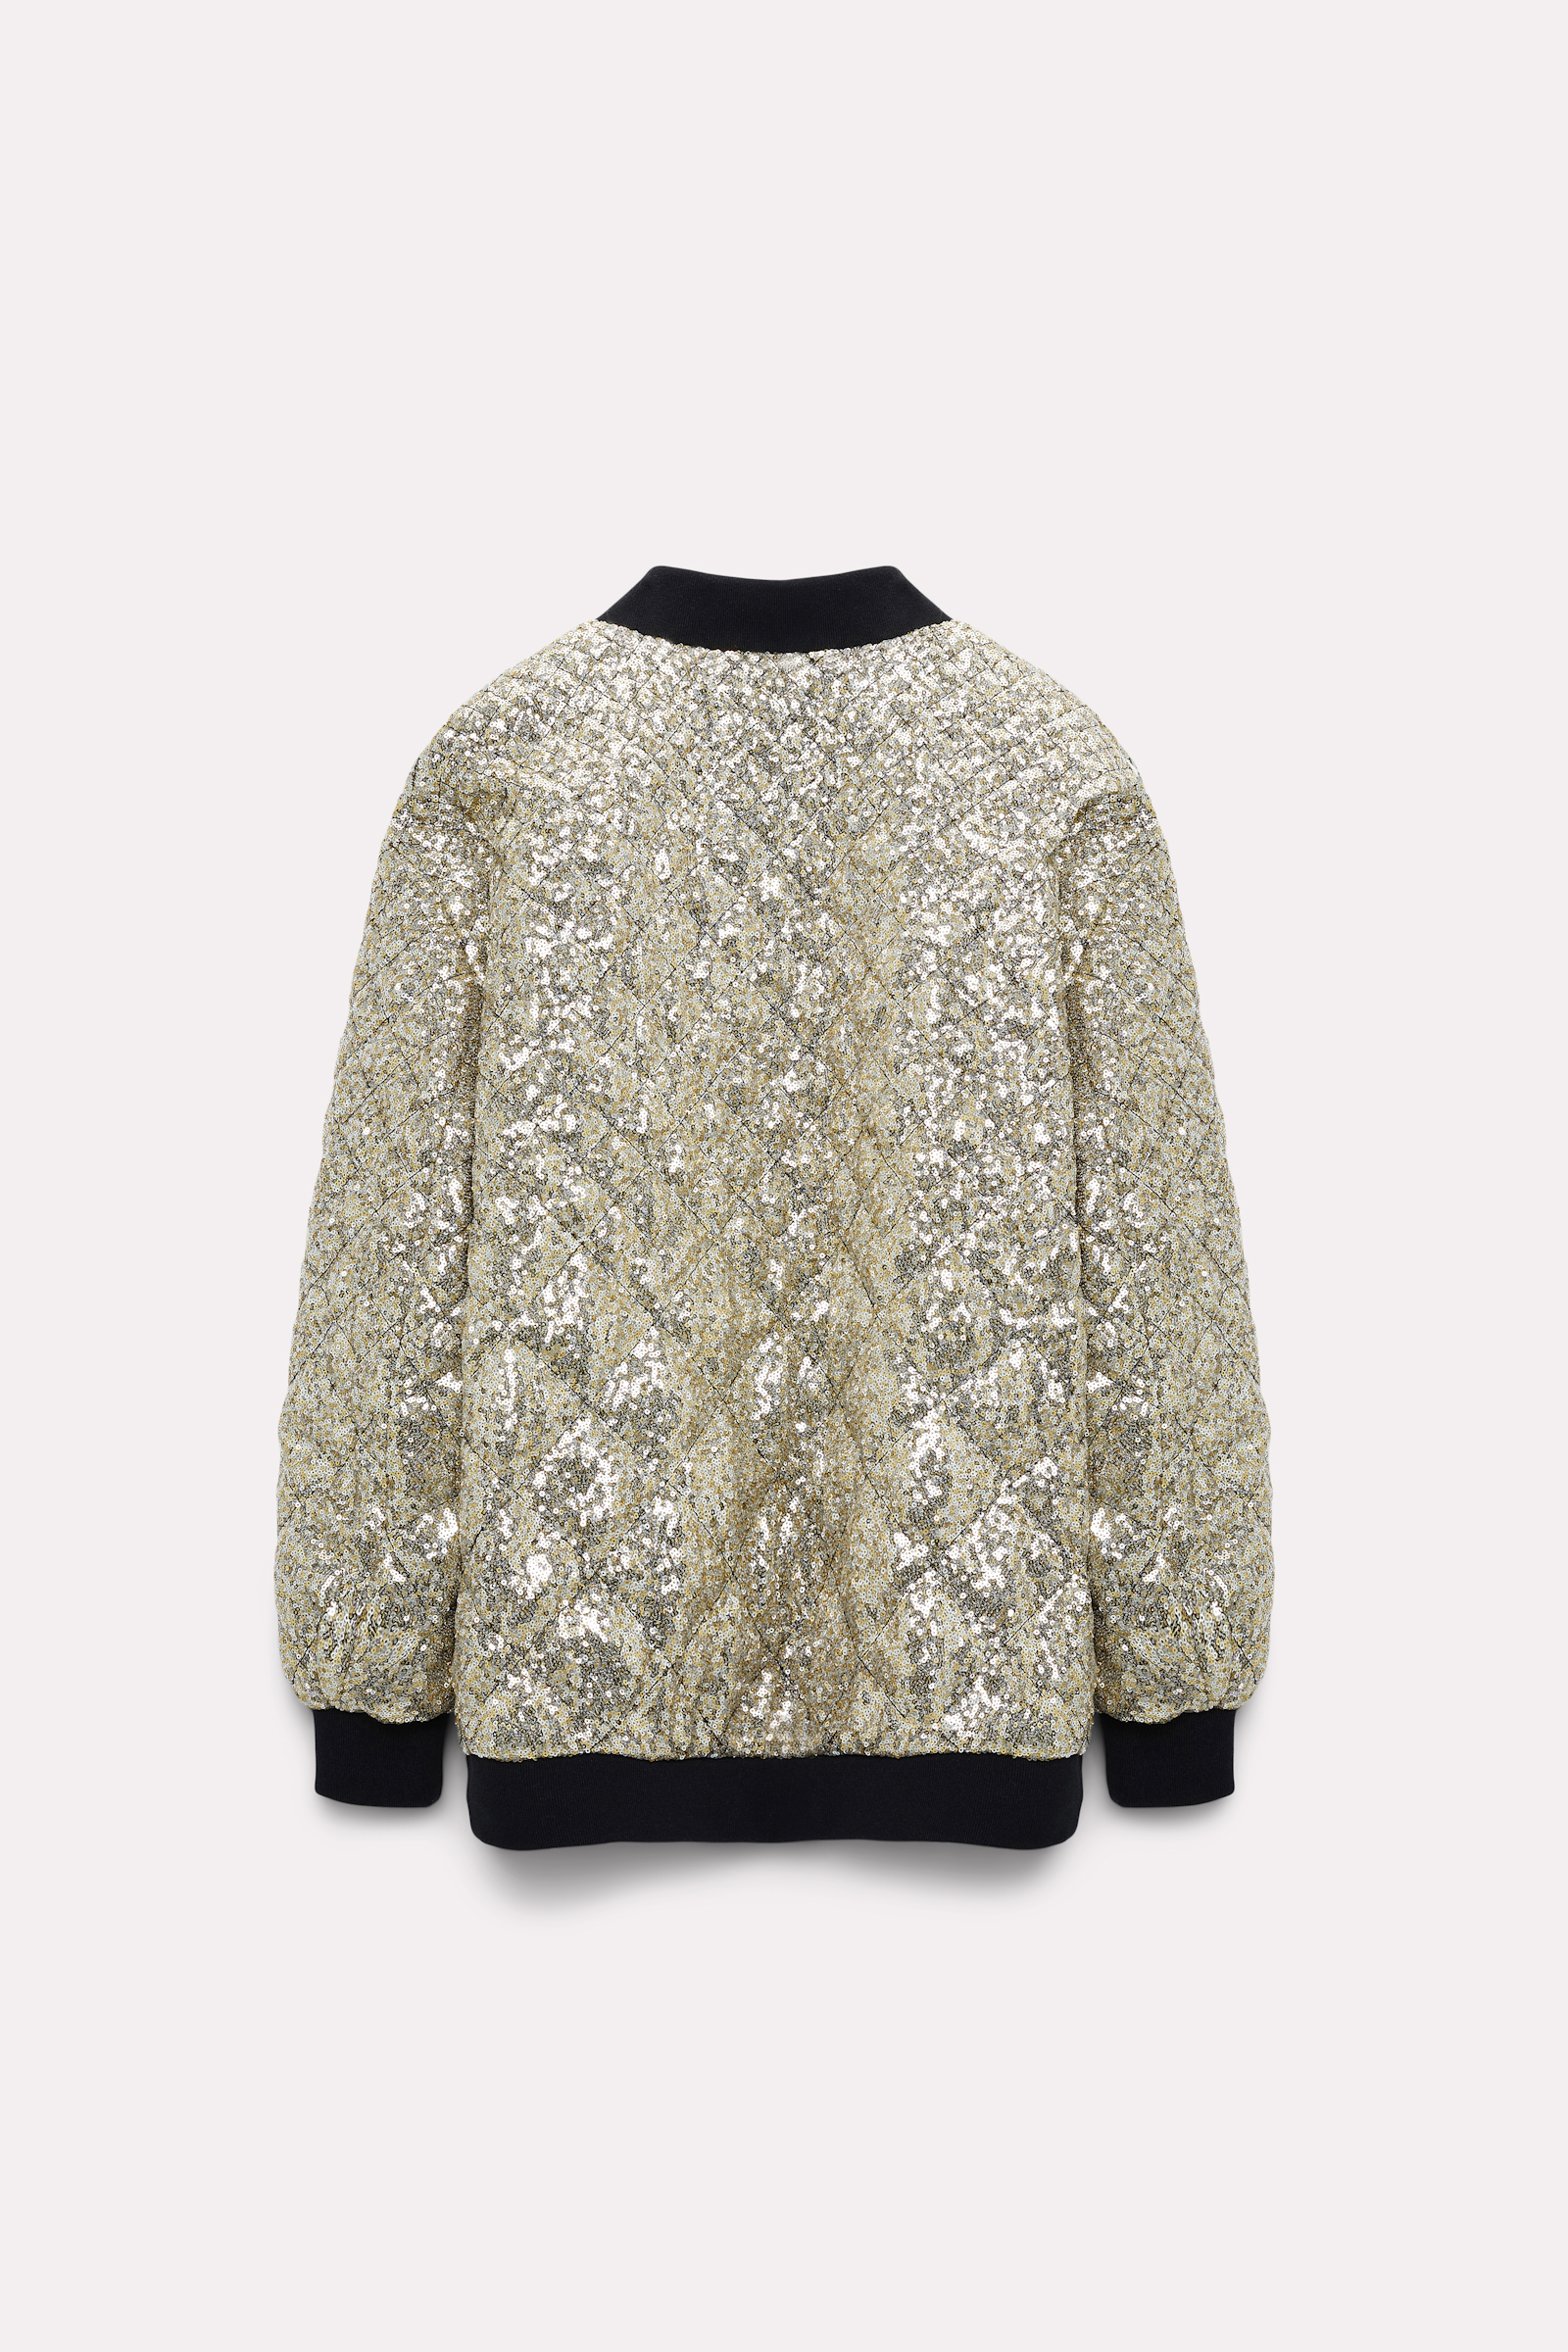 Dorothee Schumacher Oversized quilted sequin jacket colorful sparkle